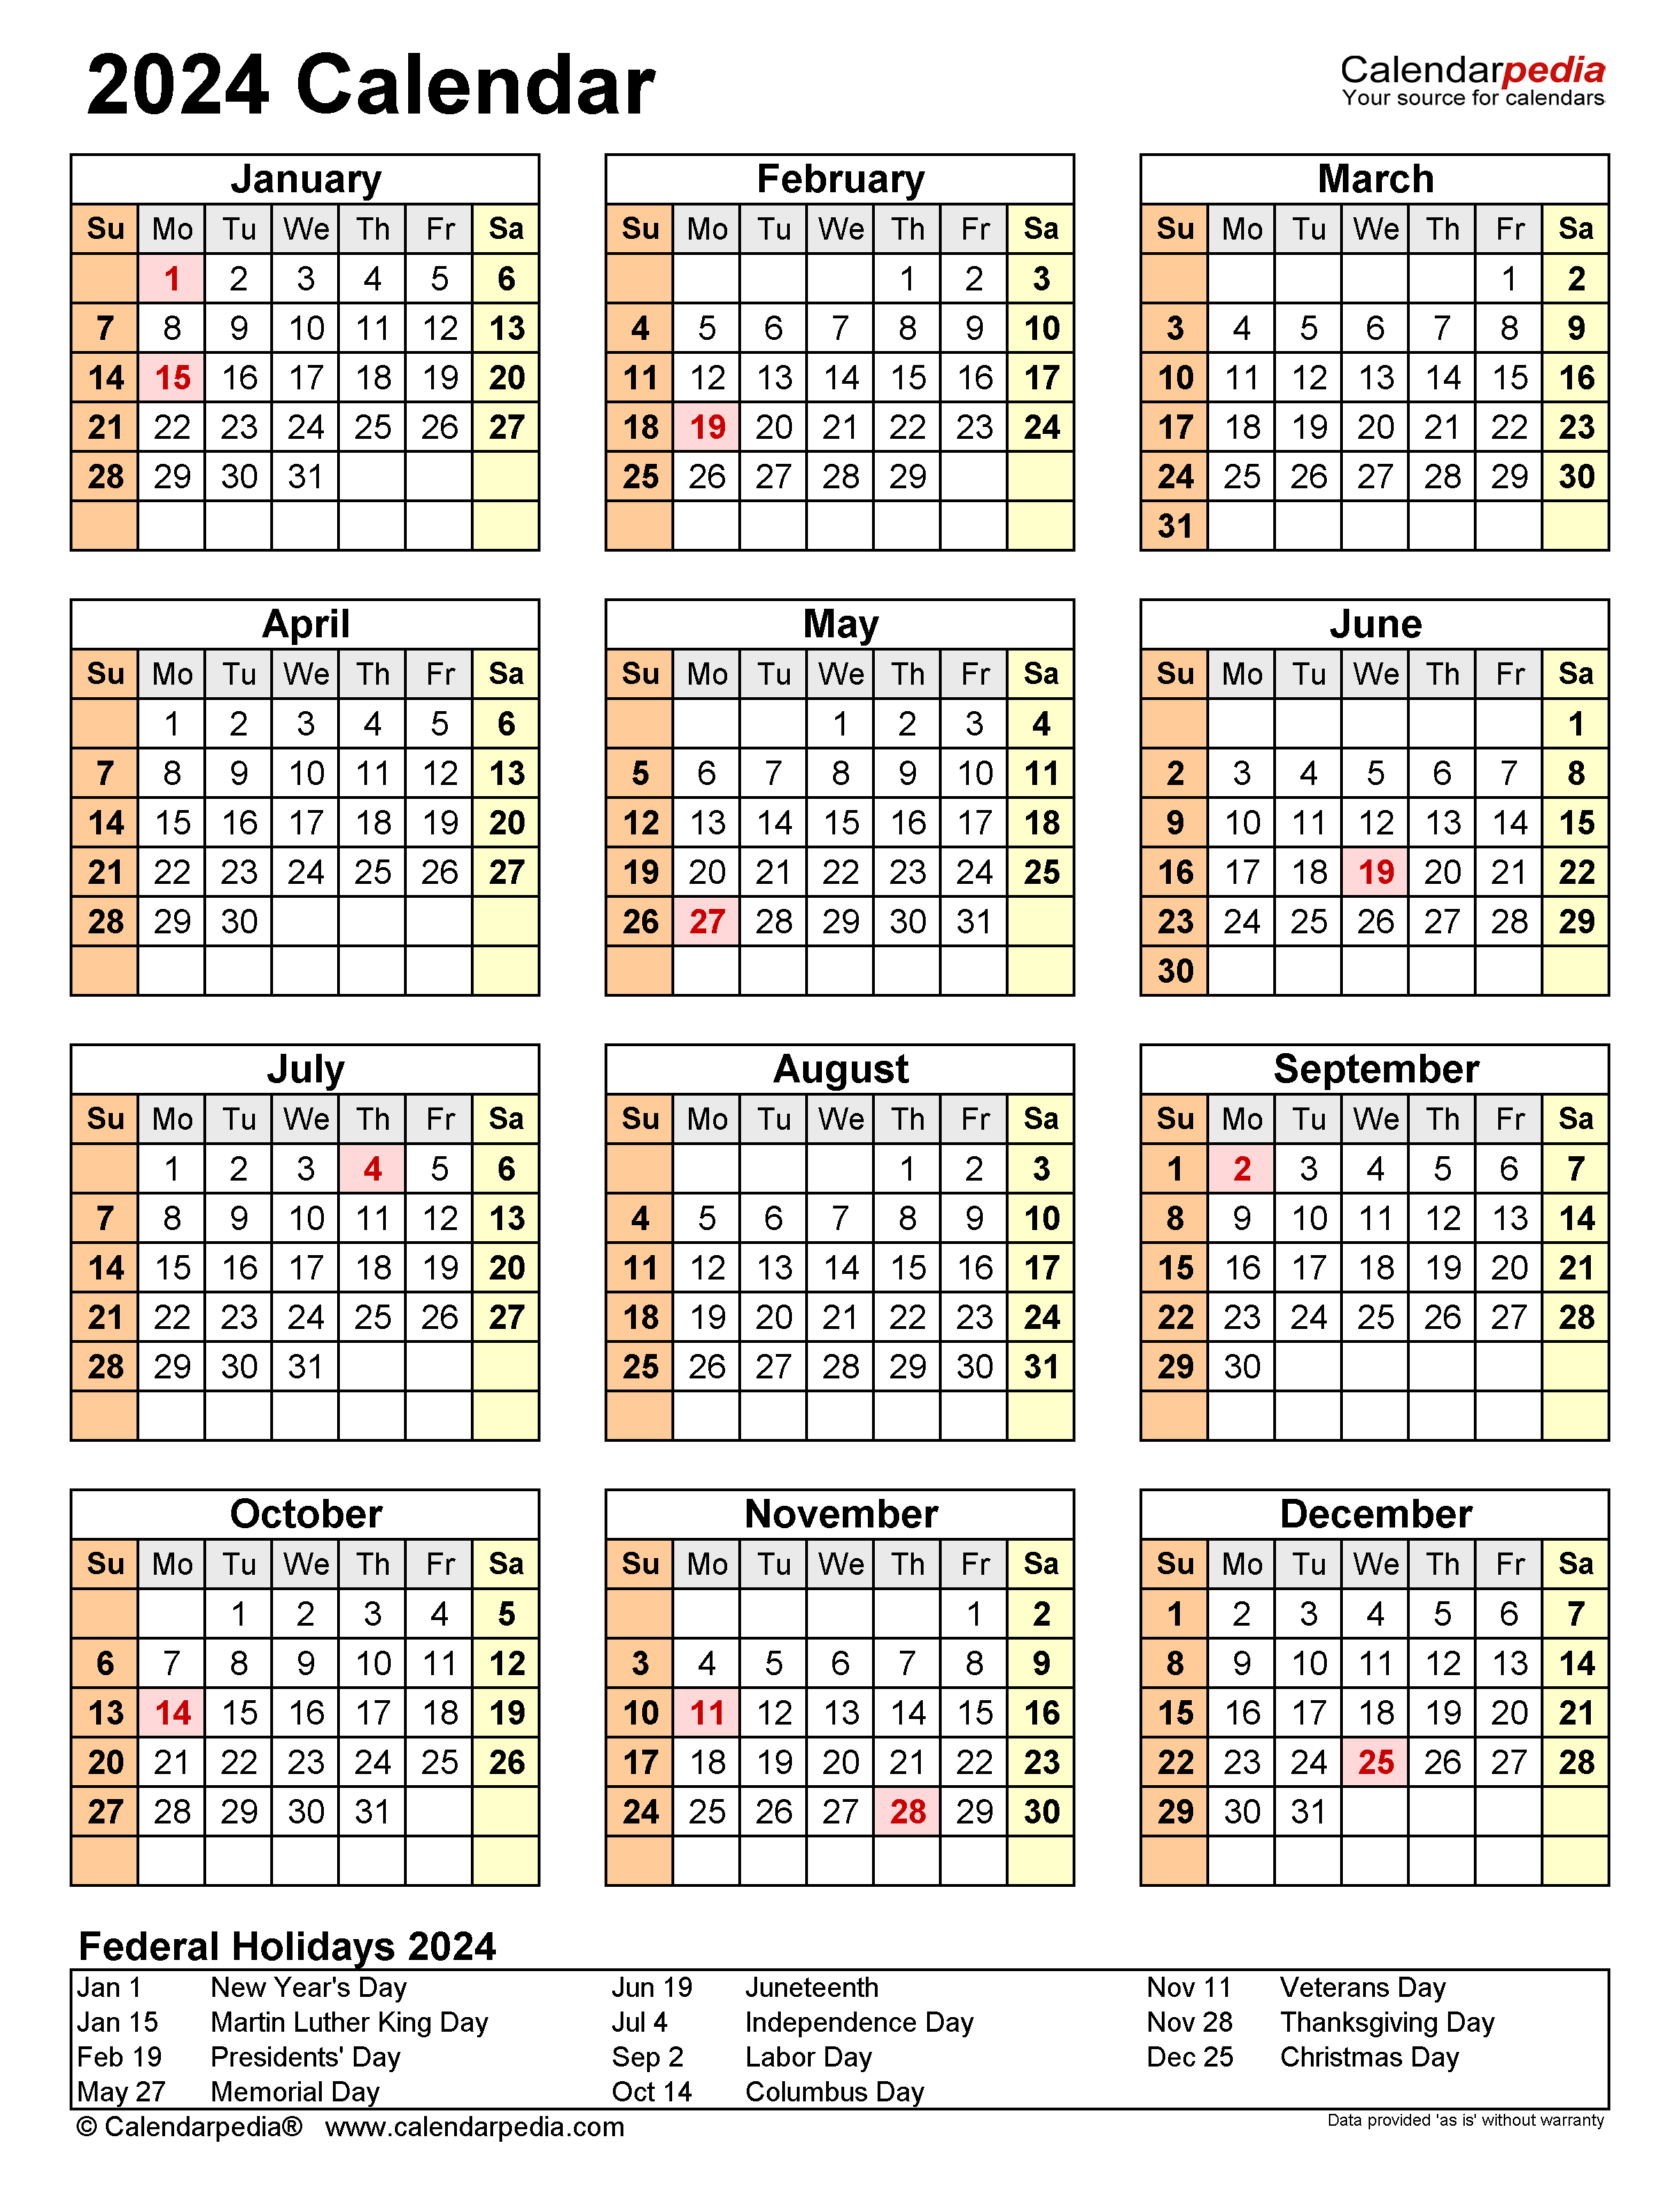 Free Printable 2024 Calendar With Holidays Crownflourmills | Free Printable 2024 Monthly Calendar With Holidays Pdf Free Download